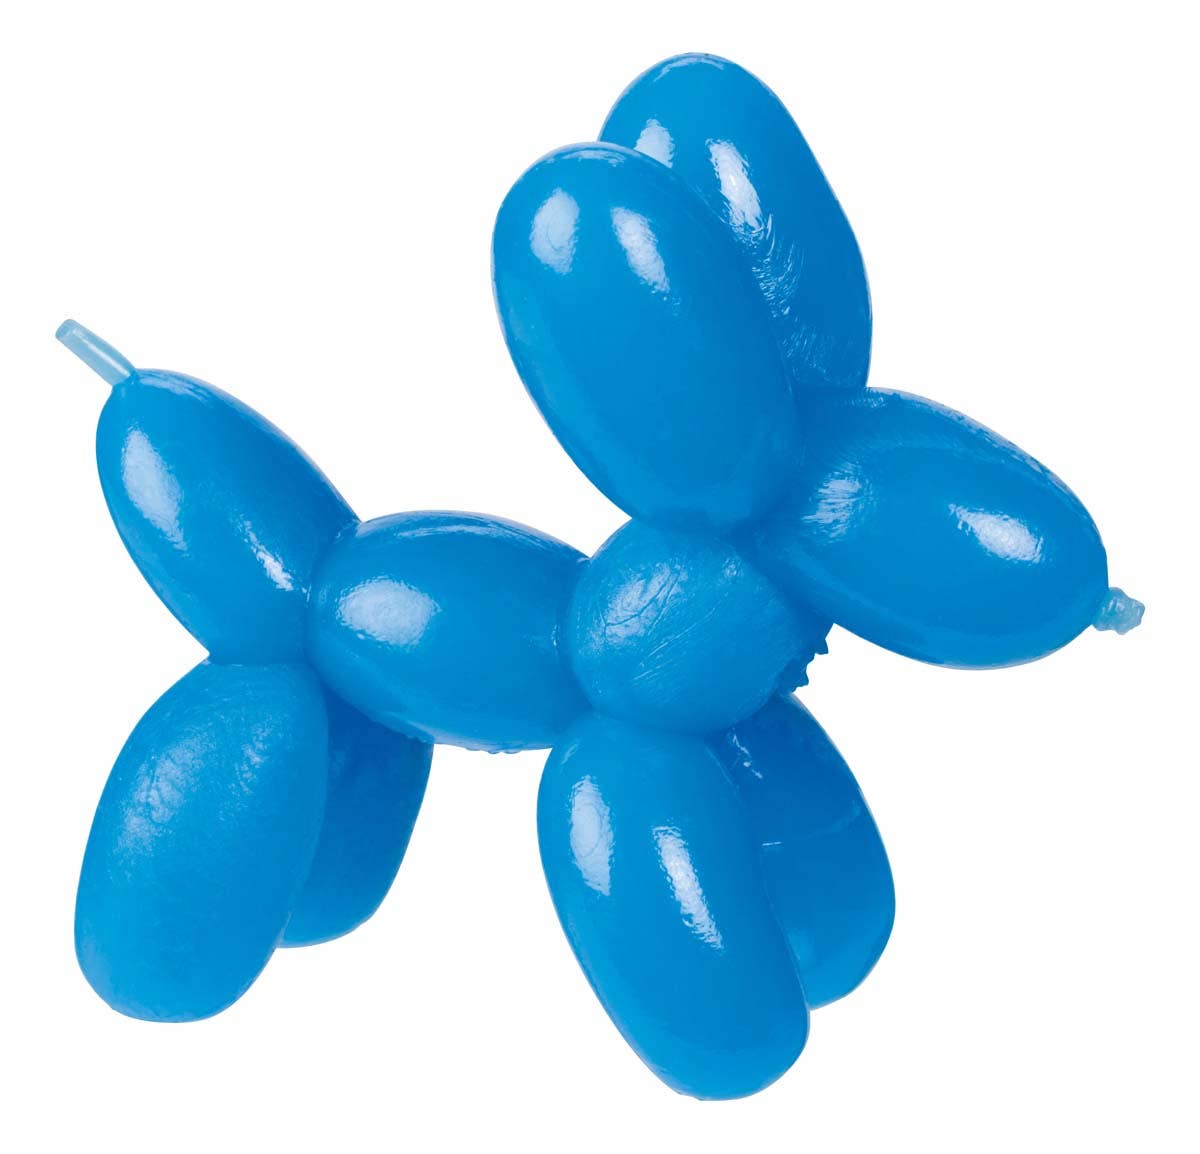 Stretchy Balloon Dogs (Multiple Colors Available)